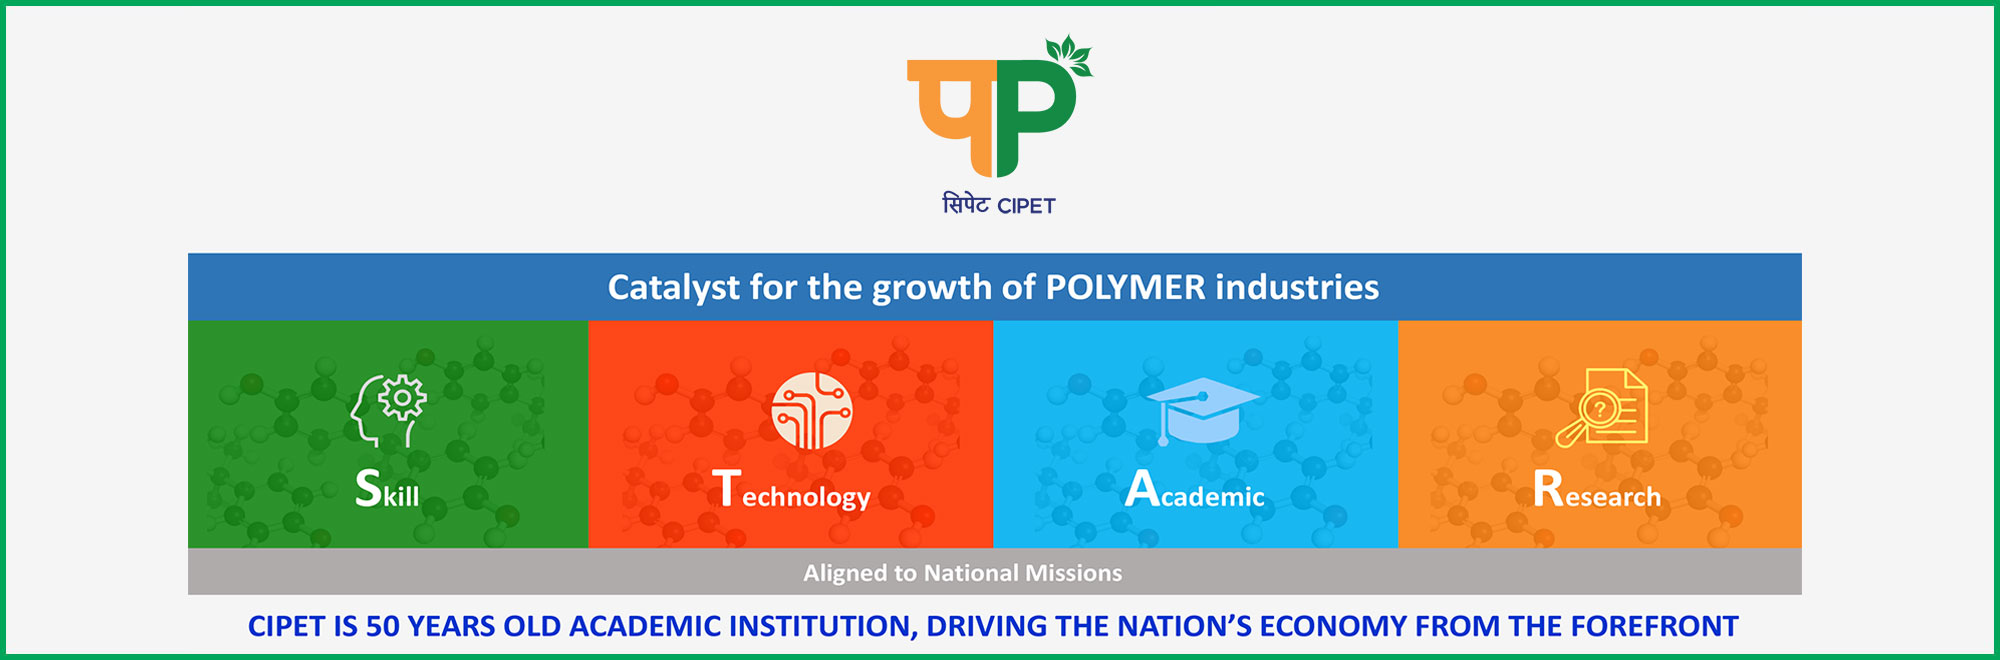 CIPET IS 50 YEARS OLD ACADEMIC INSTITUTION, DRIVING THE NATION'S ECONOMY FROM THE FOREFRONT